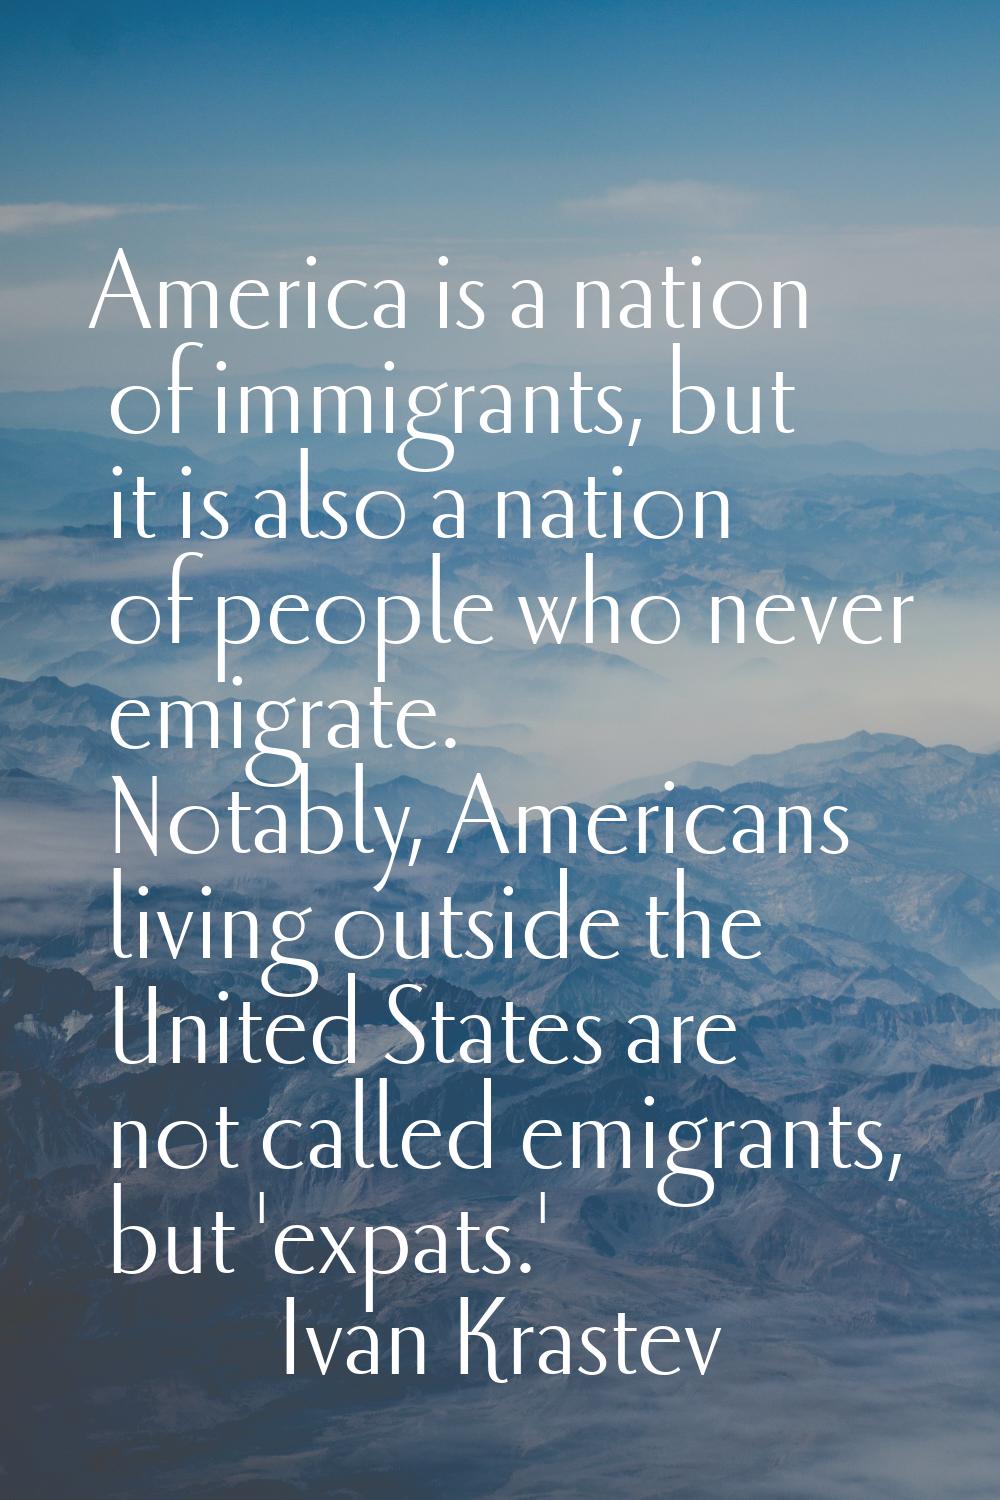 America is a nation of immigrants, but it is also a nation of people who never emigrate. Notably, A